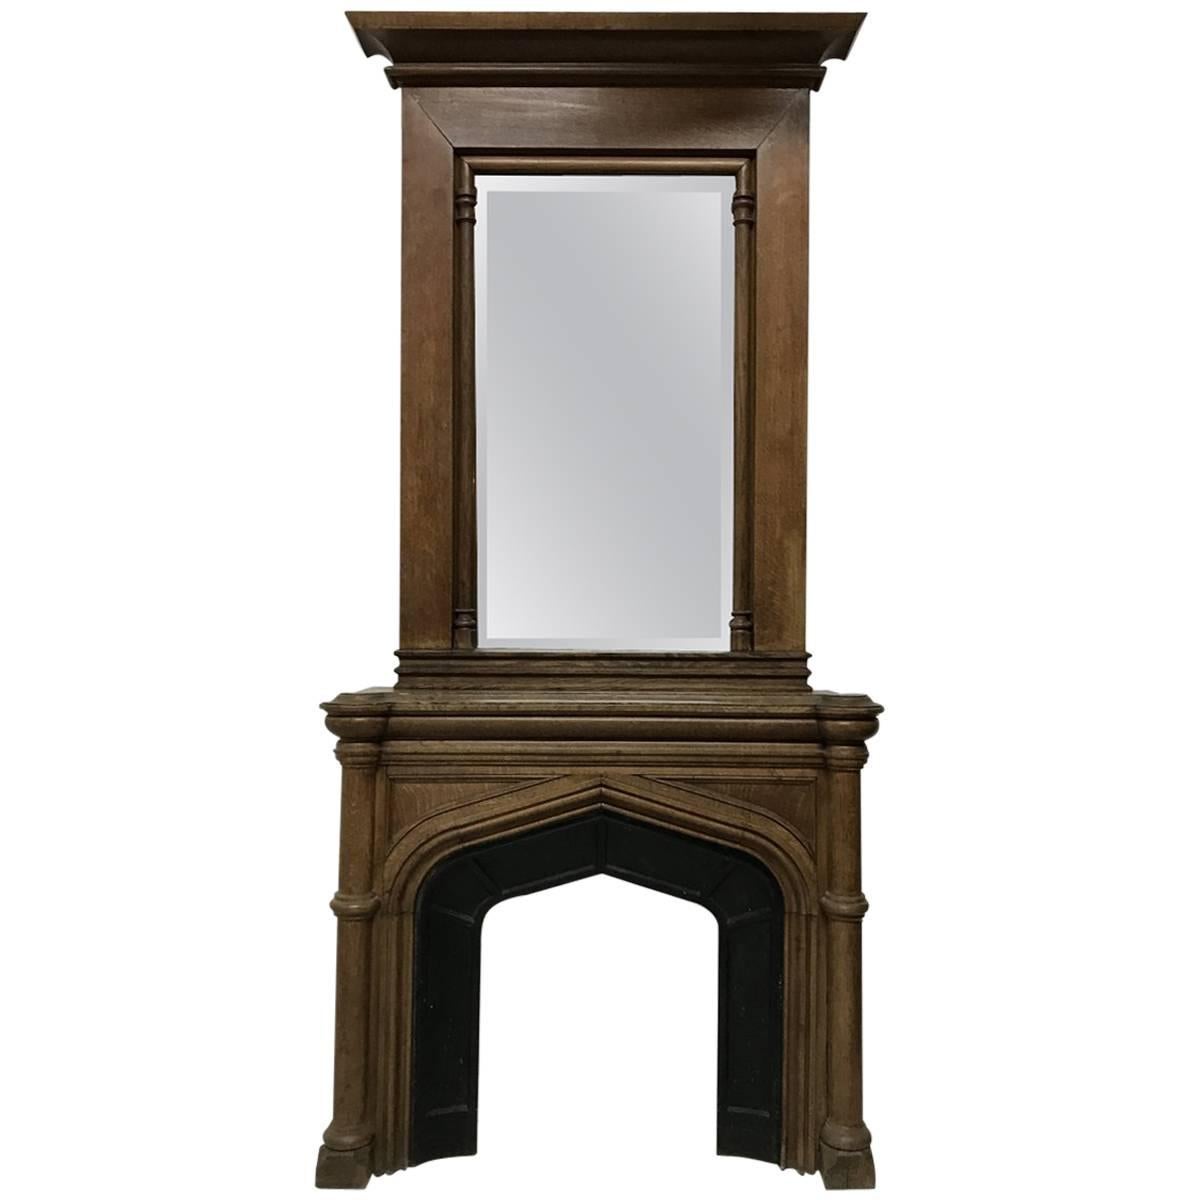 Gothic French Oak Fireplace with Original Overmantel Mirror and Turned Pillars